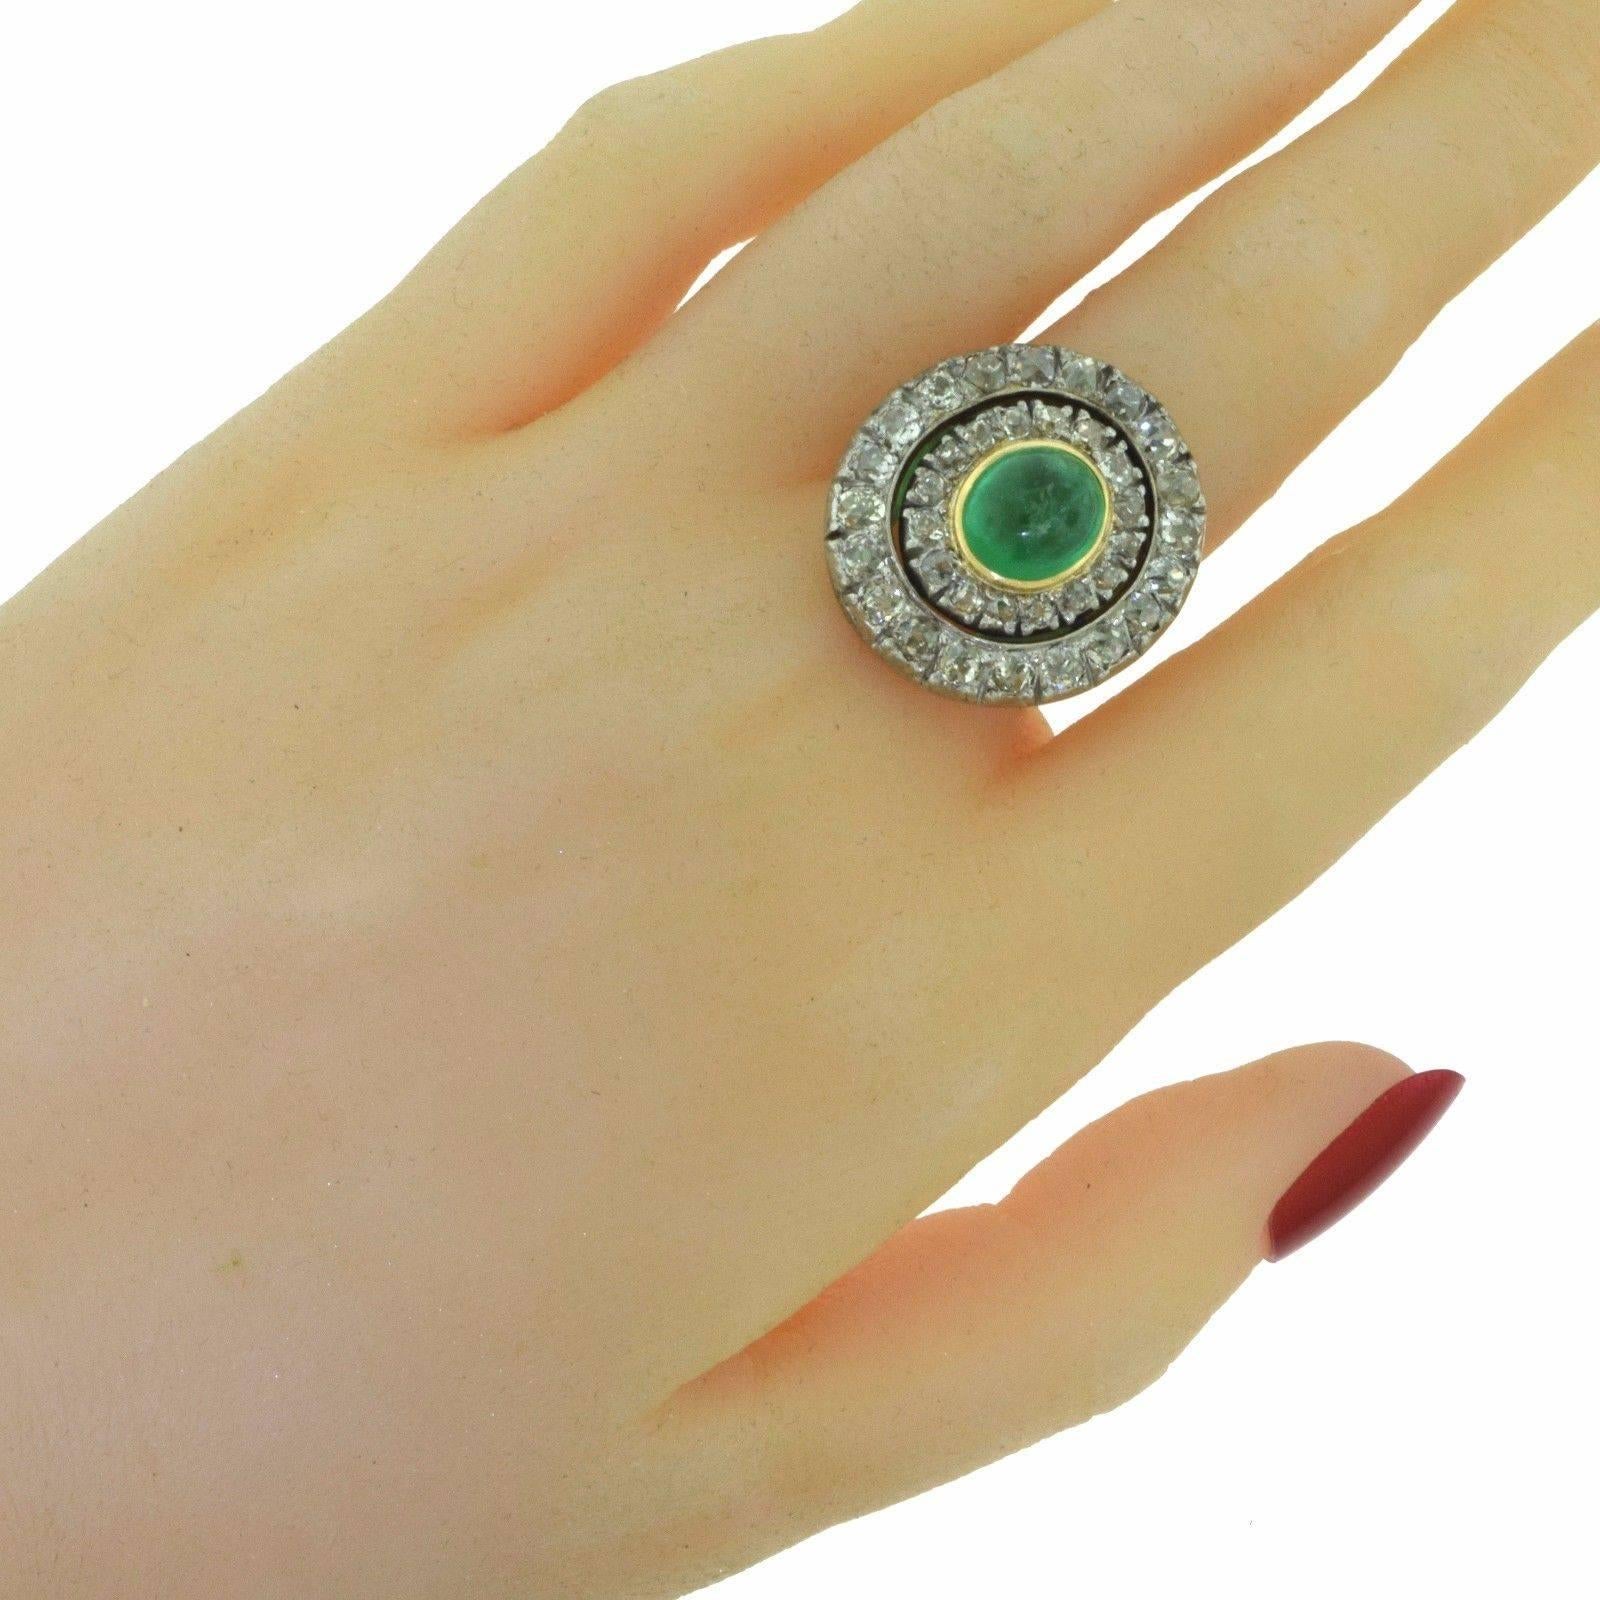 
Metal: 18k Yellow Gold
Metal Purity: 18k

Stones: 
Round Brilliant Cut Diamonds = 4 ct
1 Cabochon Round Emerald = 3.25

Diamond Color: J
Diamond Clarity: VS
Total Carat Weight: 7.25 ct
Ring Diameter: 23.8 mm
Ring Size: 5.5 (sizable) 
Total Item